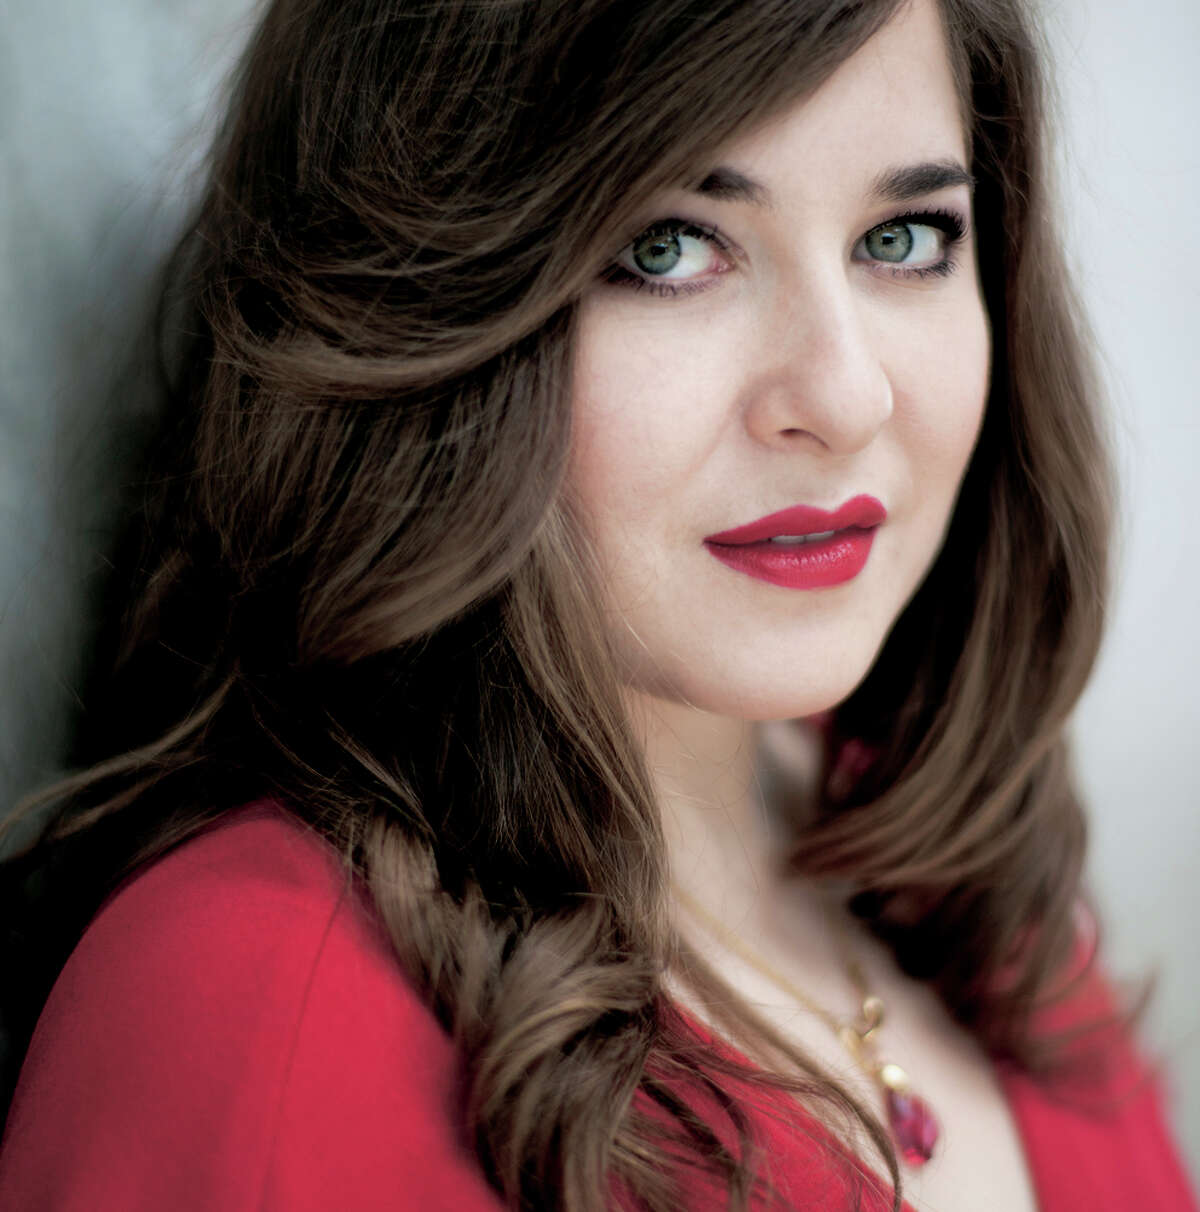 Renowned contemporary cellist Alisa Weilerstein is coming to S.F.